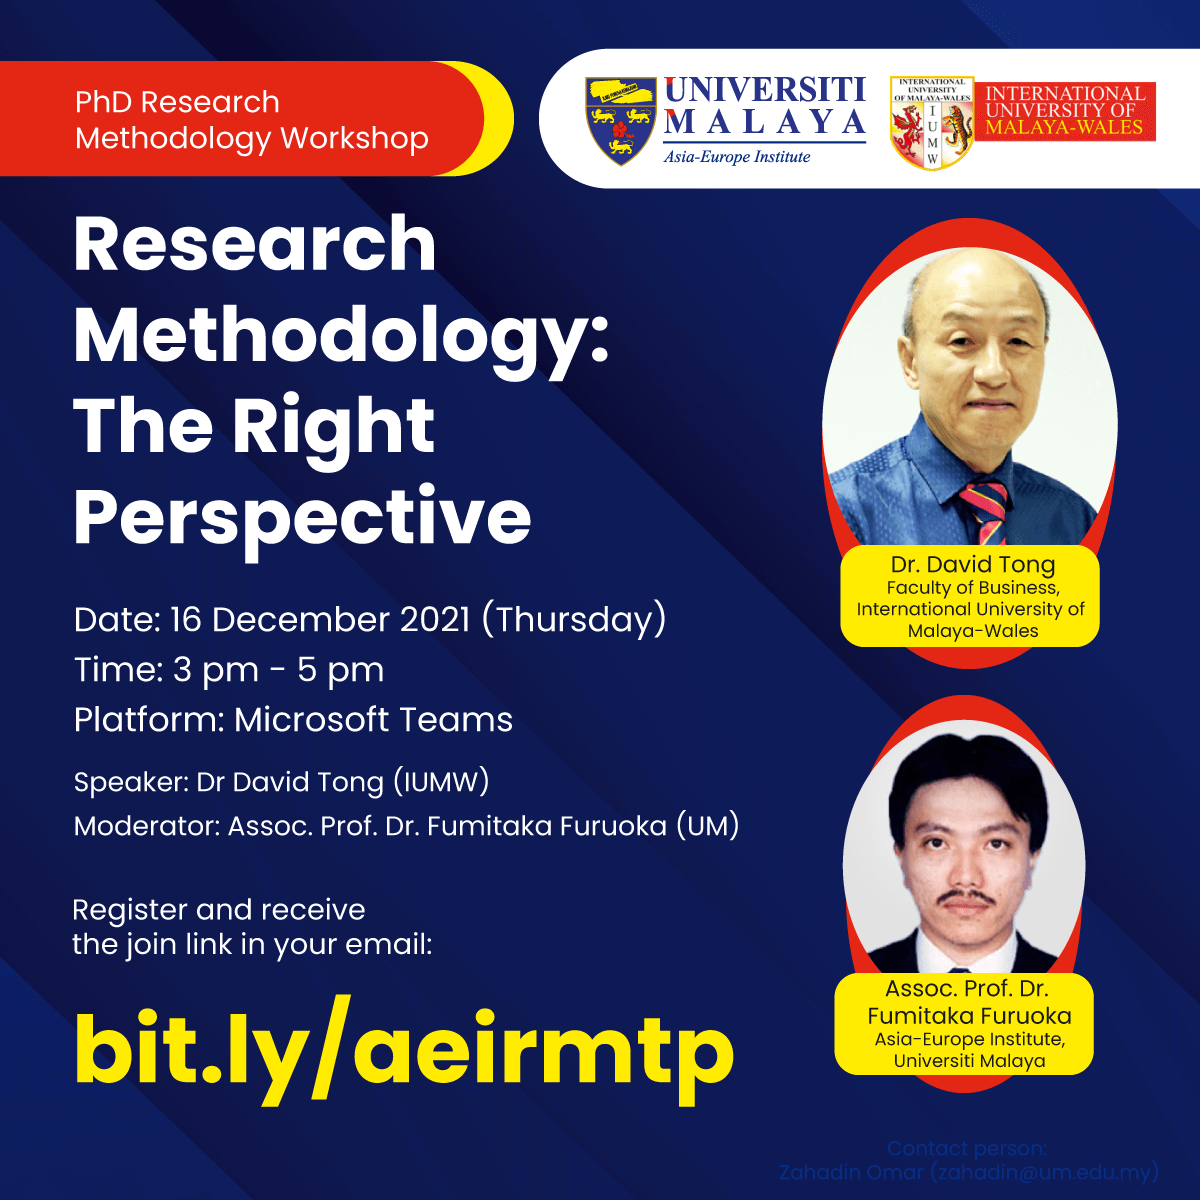 Research Methodology: The Right Perspective Workshop